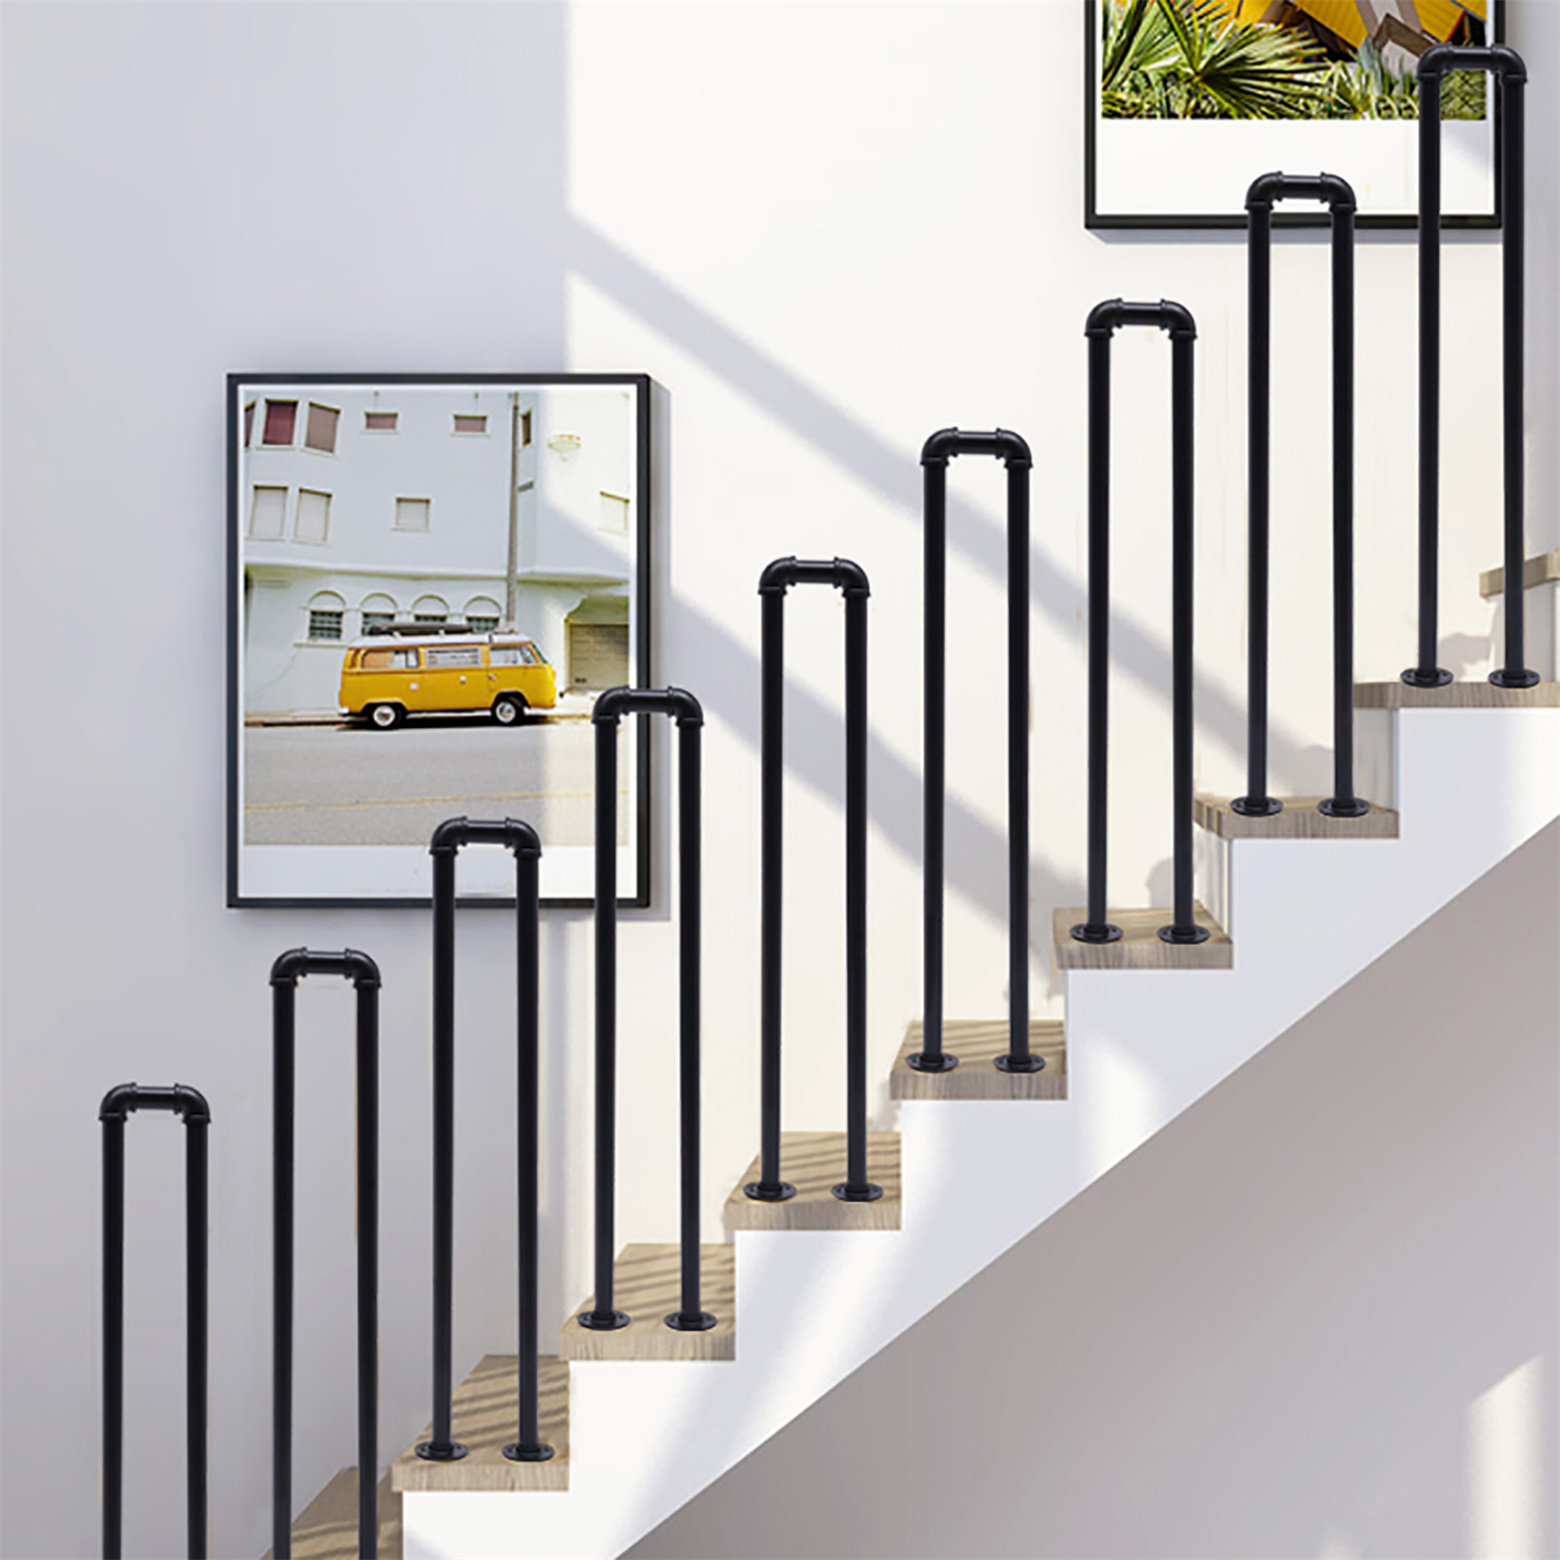 Digital Platform Scale with Extra Wide Handrails